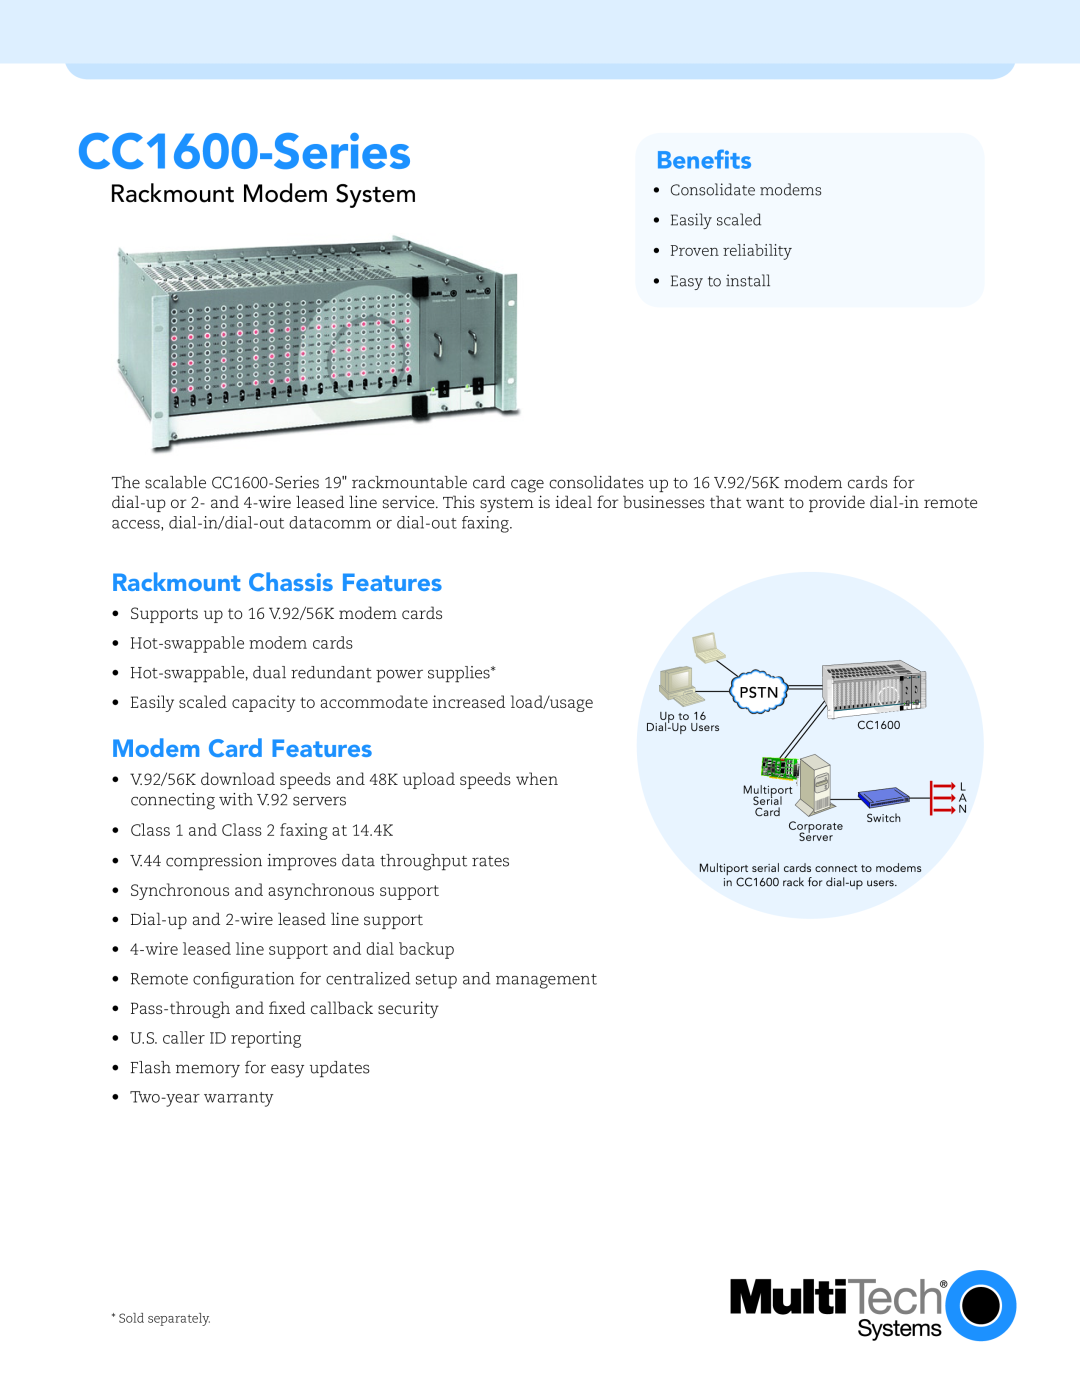 Multi-Tech Systems warranty CC1600-Series Beneﬁts, Rackmount Modem System, Rackmount Chassis Features 